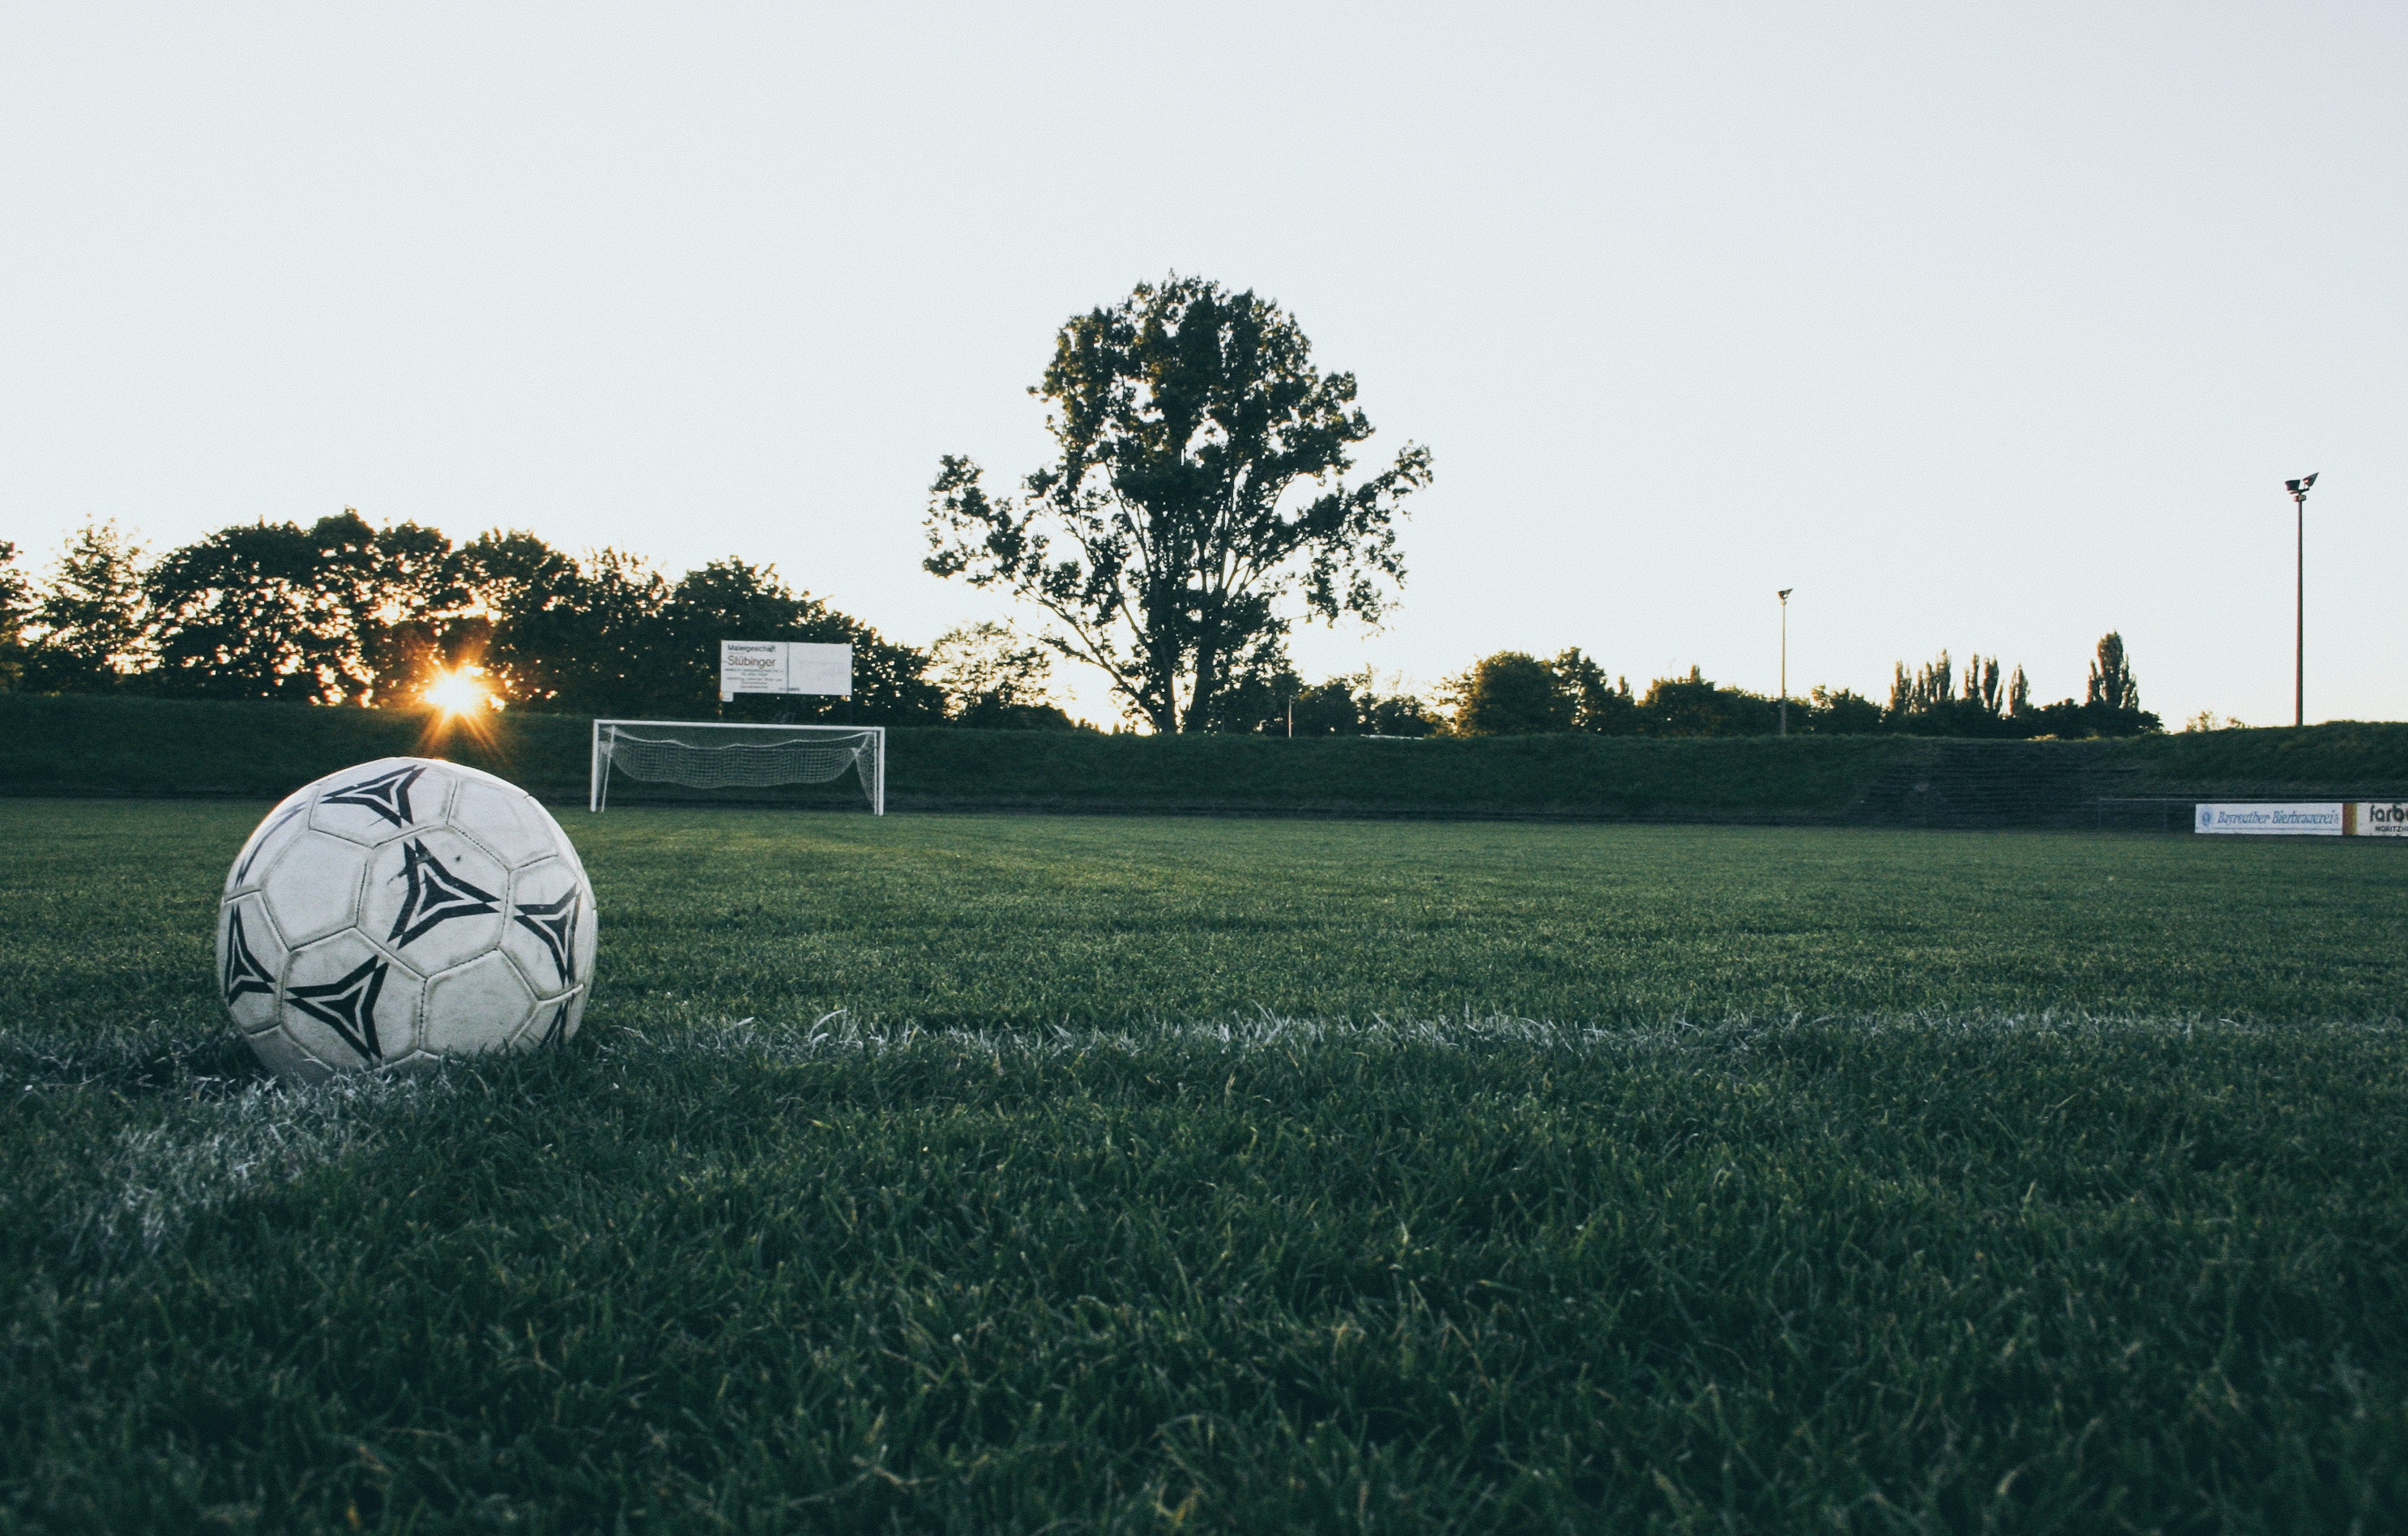 Black and White Soccer Ball on Green Grass Land during Daytime, Ball, Field, Grass, Sky, HQ Photo